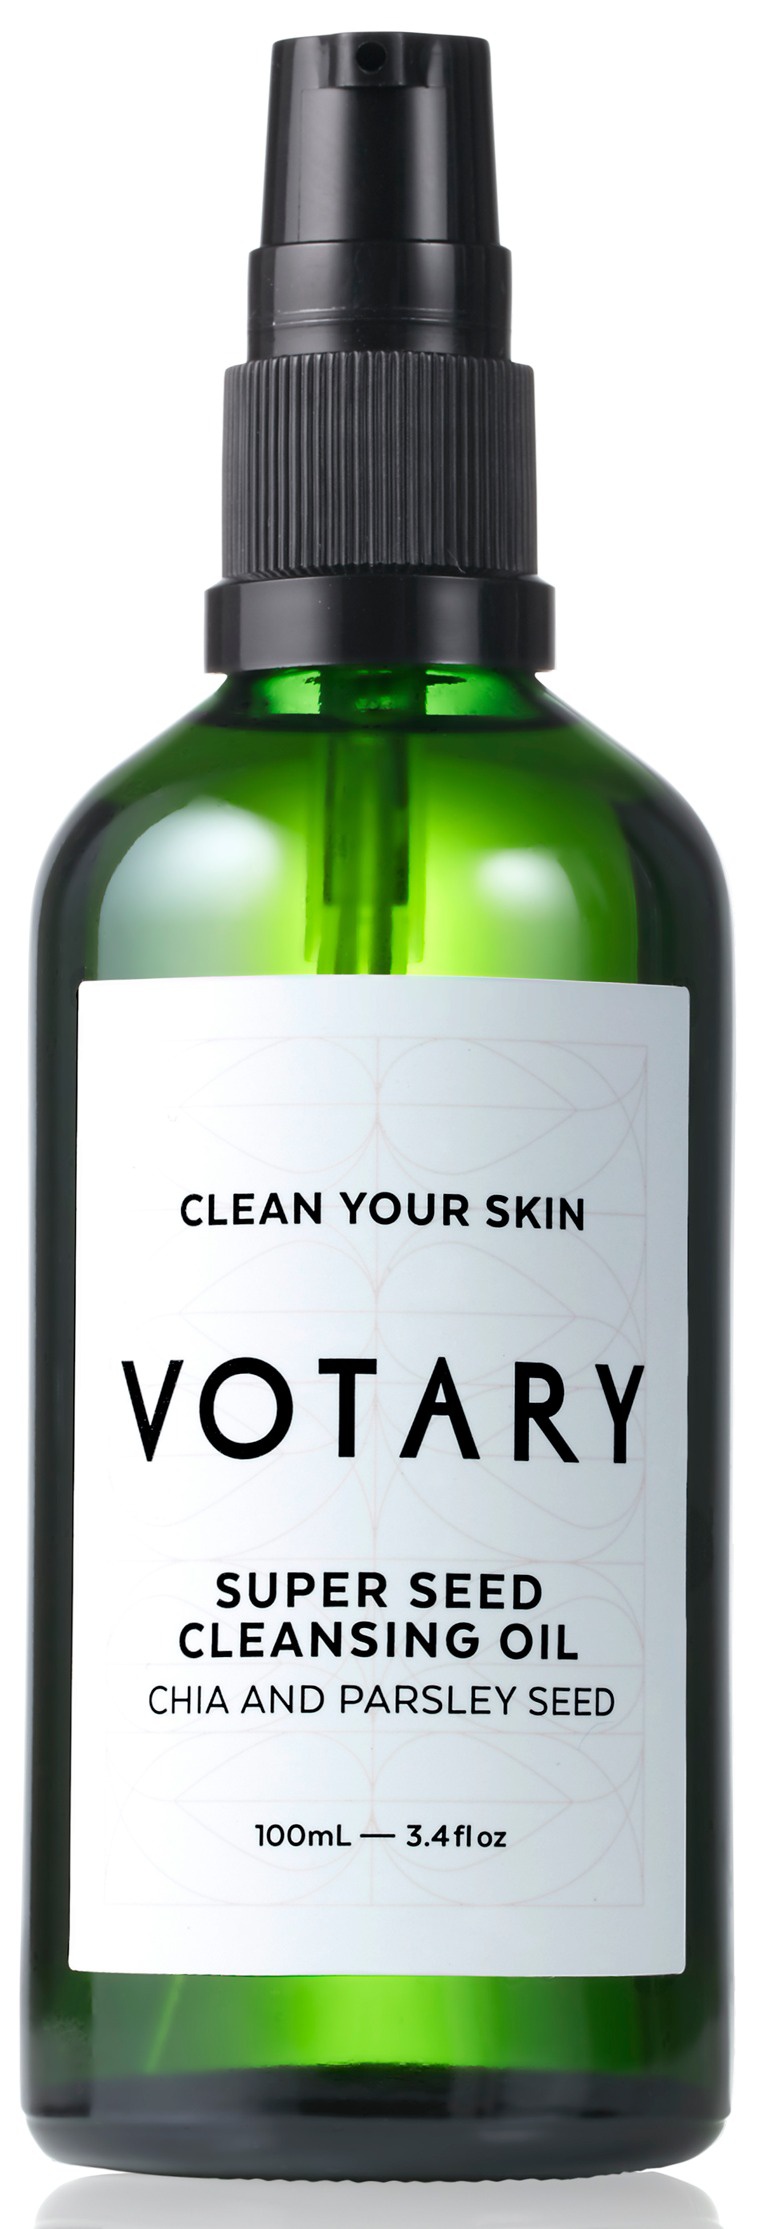 Votary Super Seed Cleansing Oil - Chia And Parsley Seed